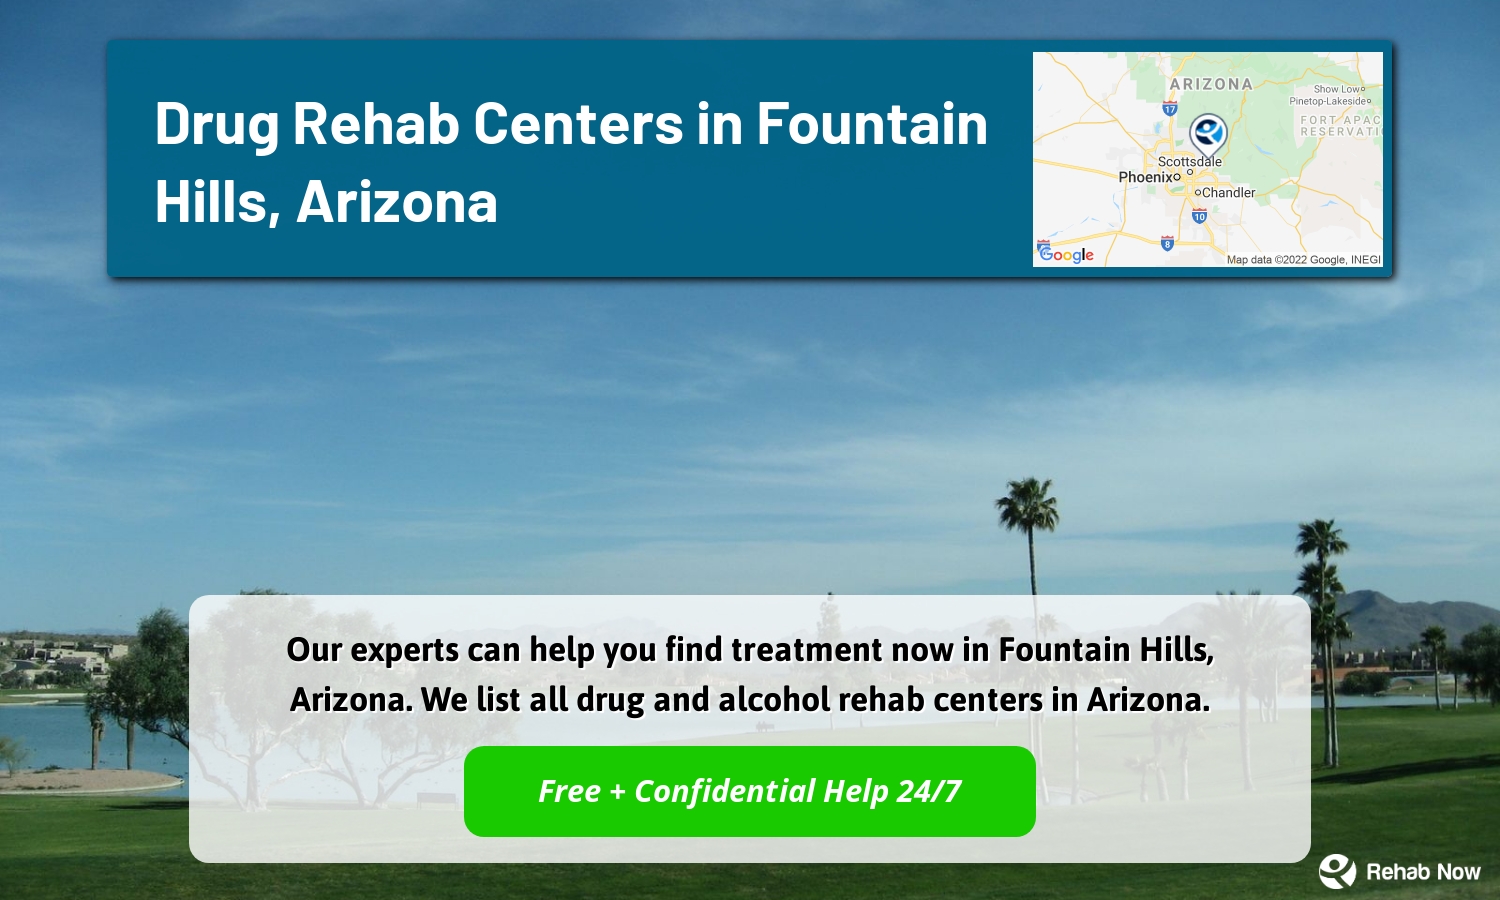 Our experts can help you find treatment now in Fountain Hills, Arizona. We list all drug and alcohol rehab centers in Arizona.